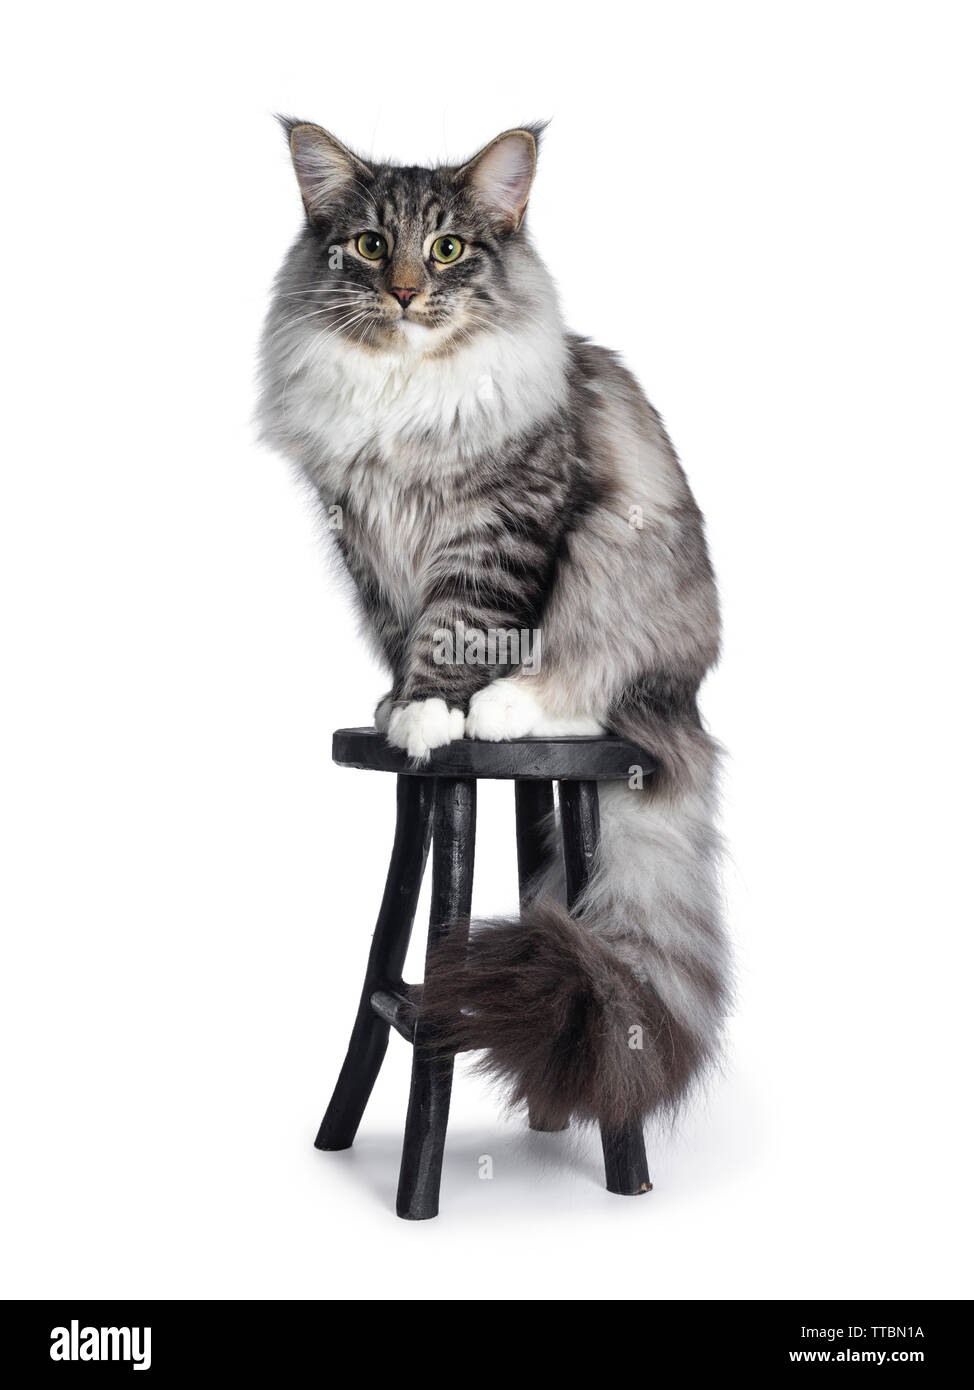 Adorable young Norwegian Forestcat, sitting side ways on stool. Looking curious beside lens. Isolated on white background. Stock Photo